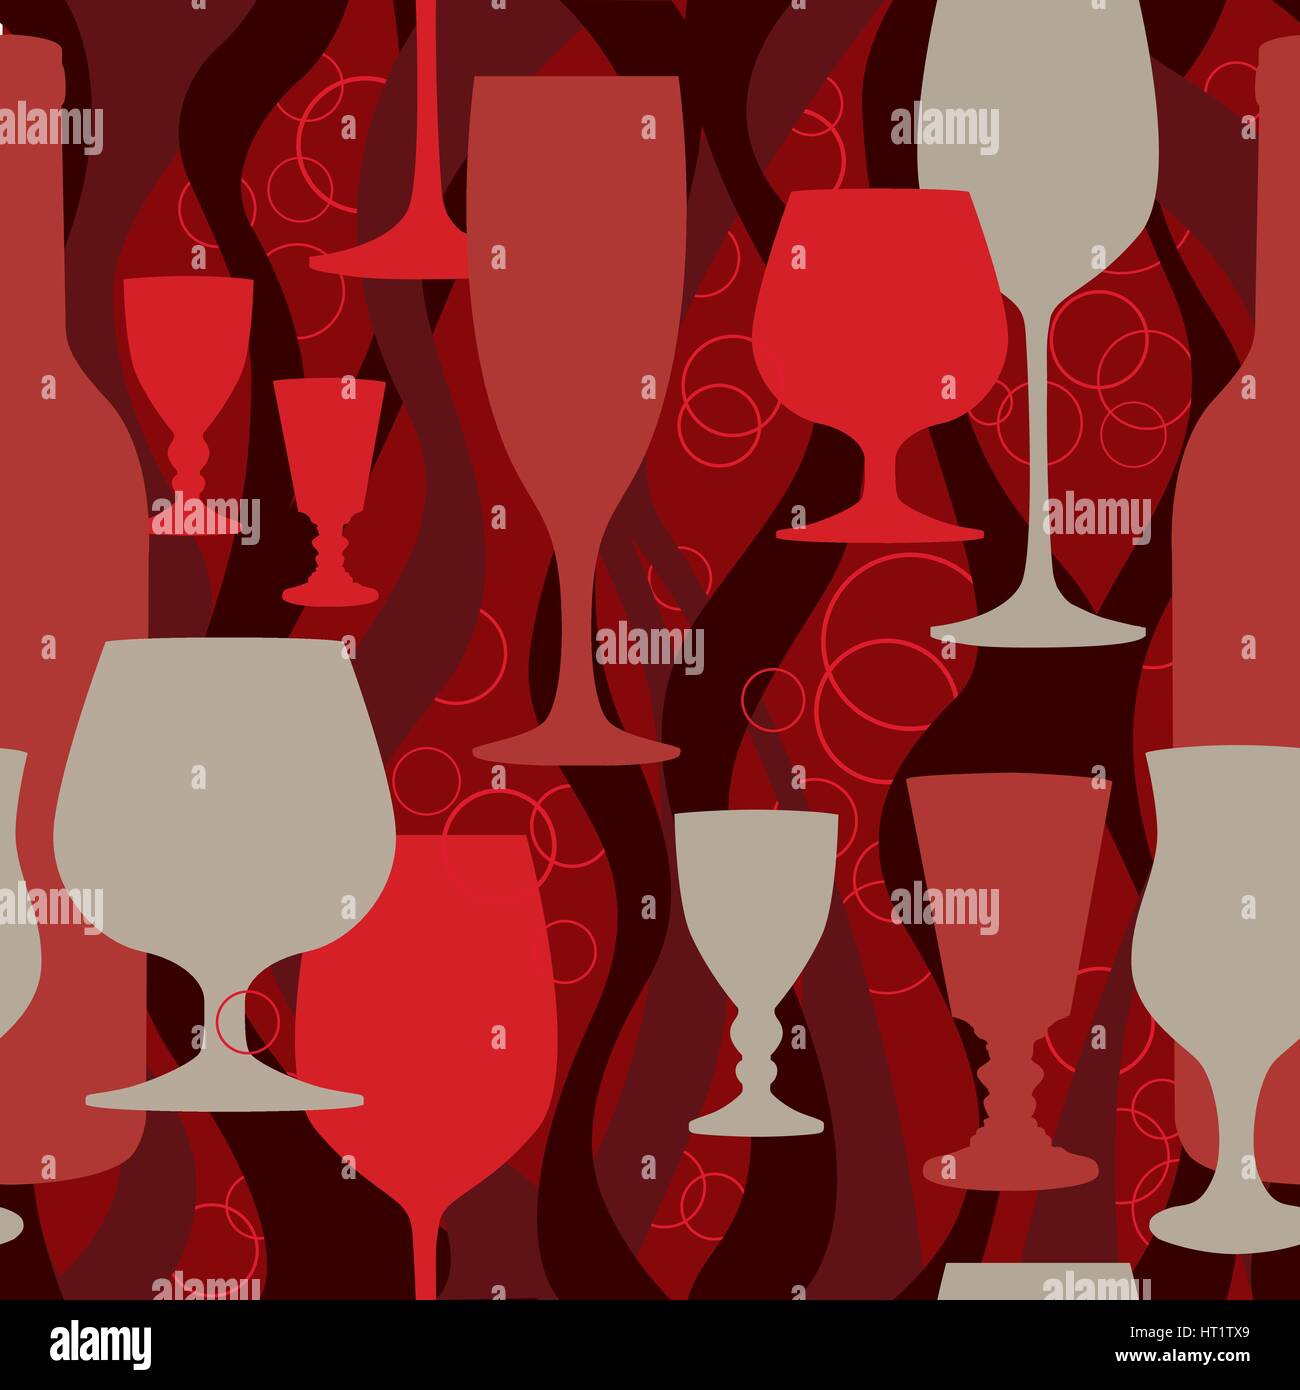 Cocktail party background in retro style Dish wear seamless pattern with wine glasses Stock Vector